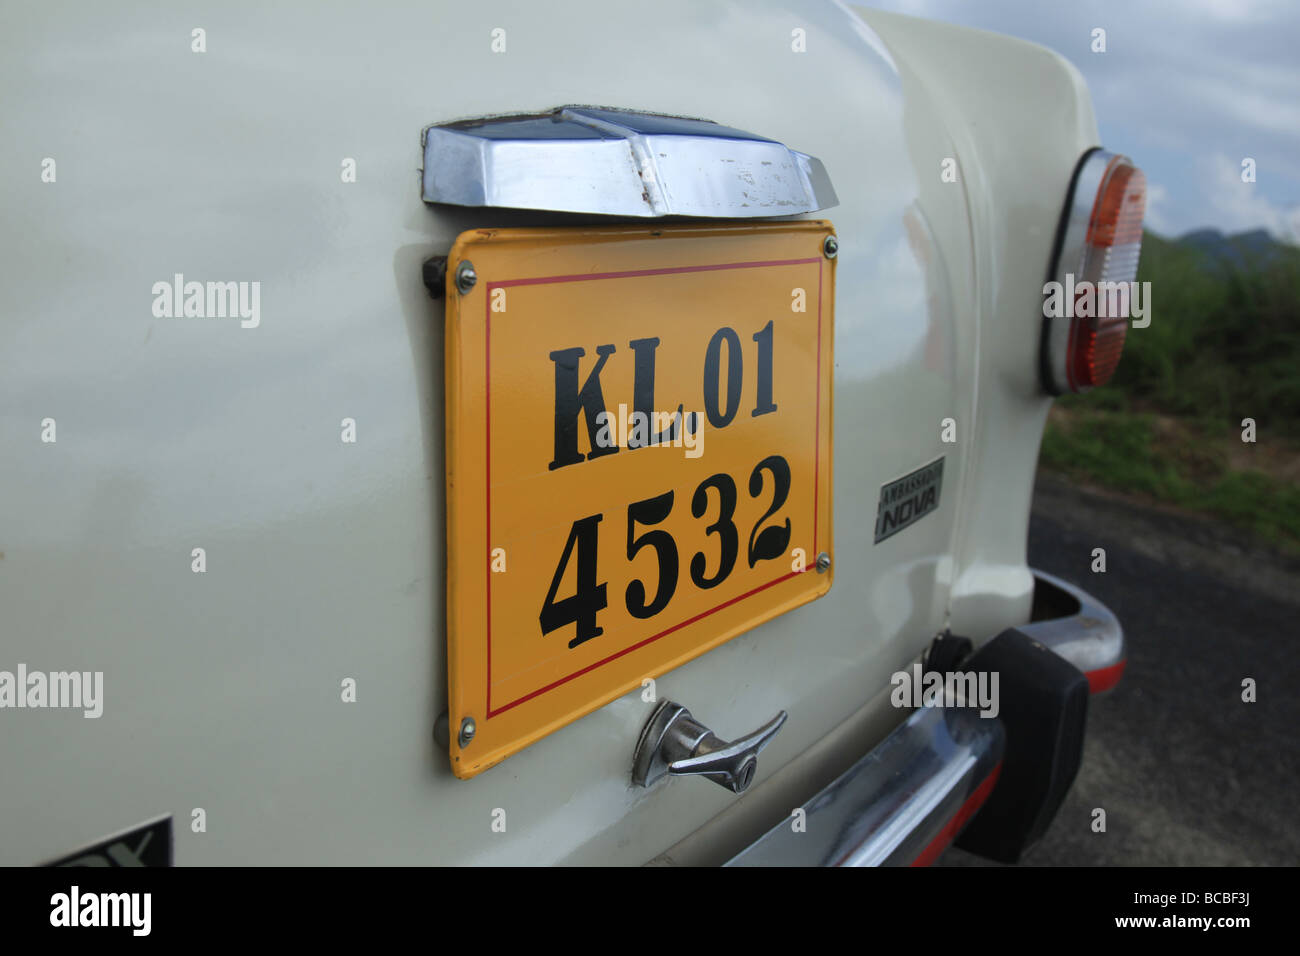 Number plate of white taxi, Kerala India Stock Photo